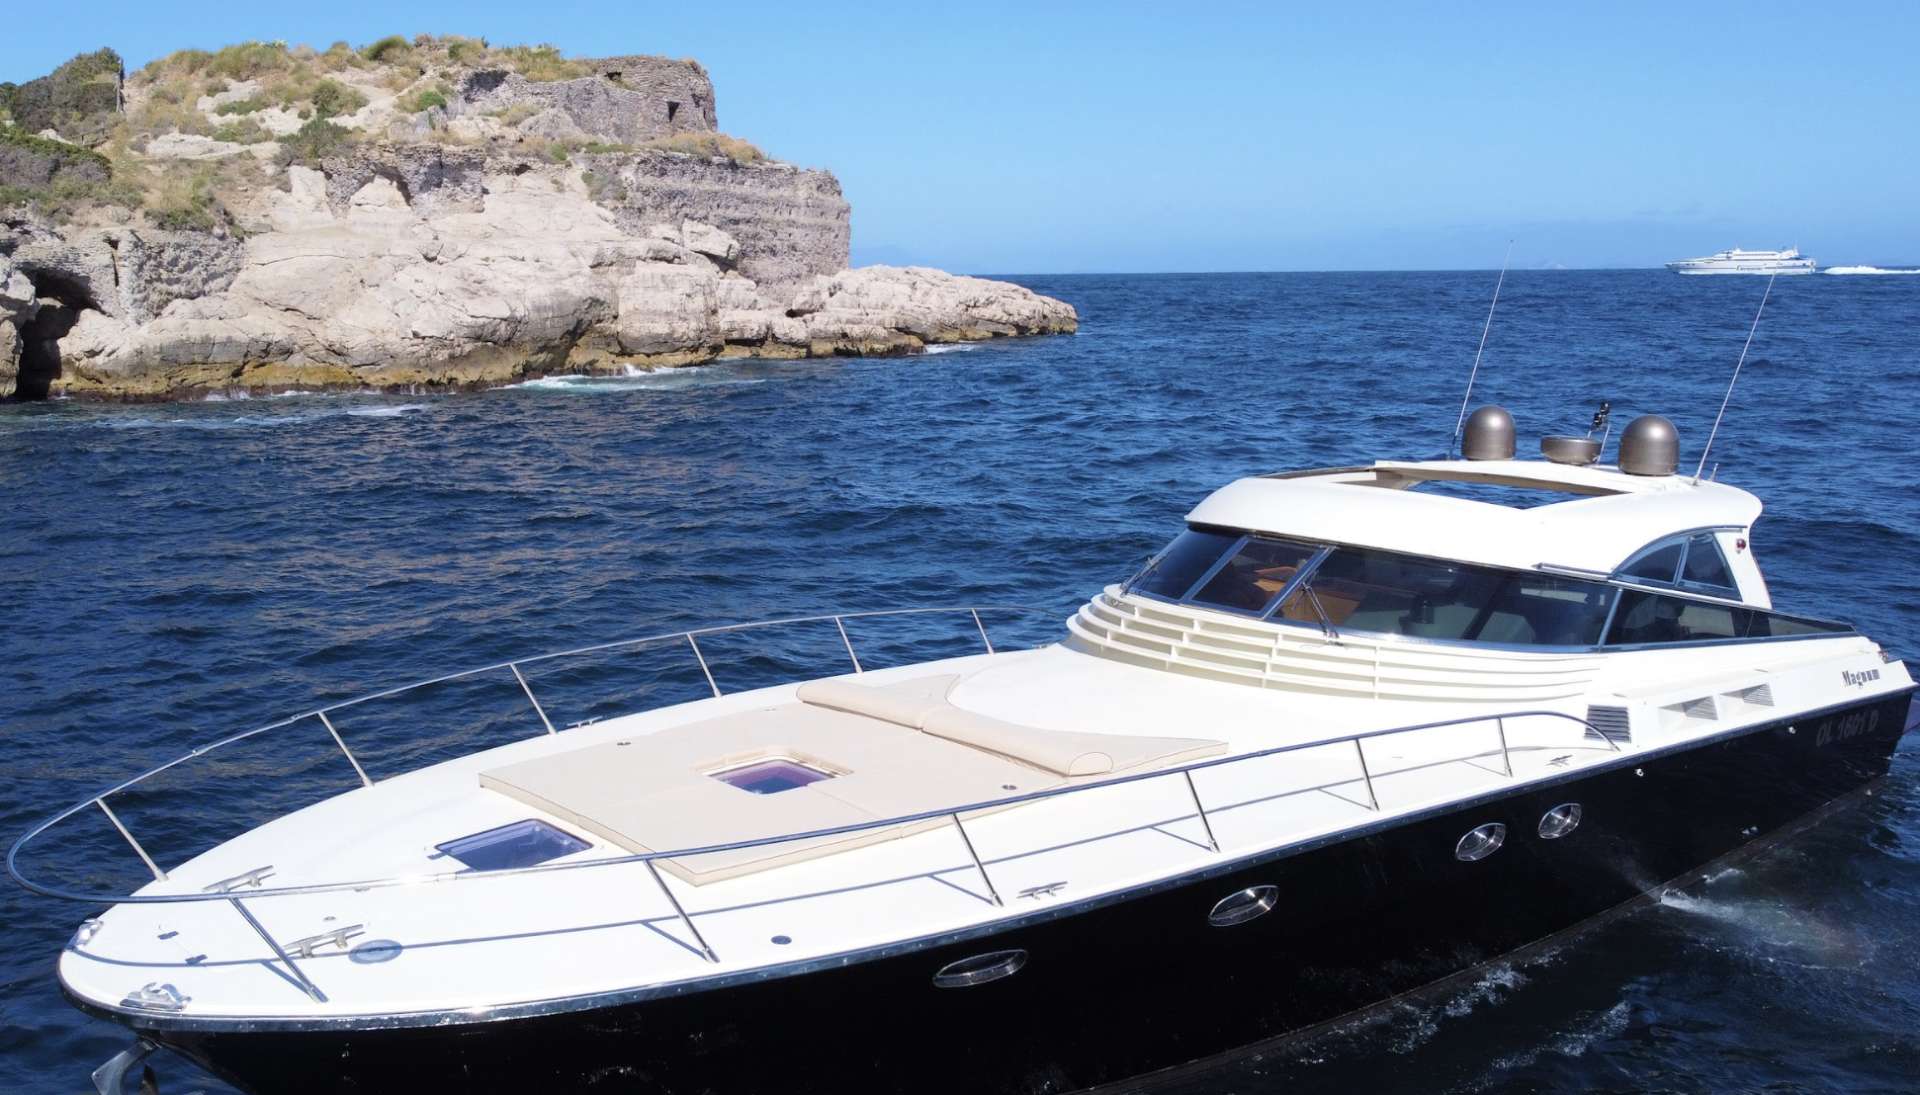 53 - Yacht Charter Naples & Boat hire in Italy Campania Bay of Naples Naples Torre del Greco 3